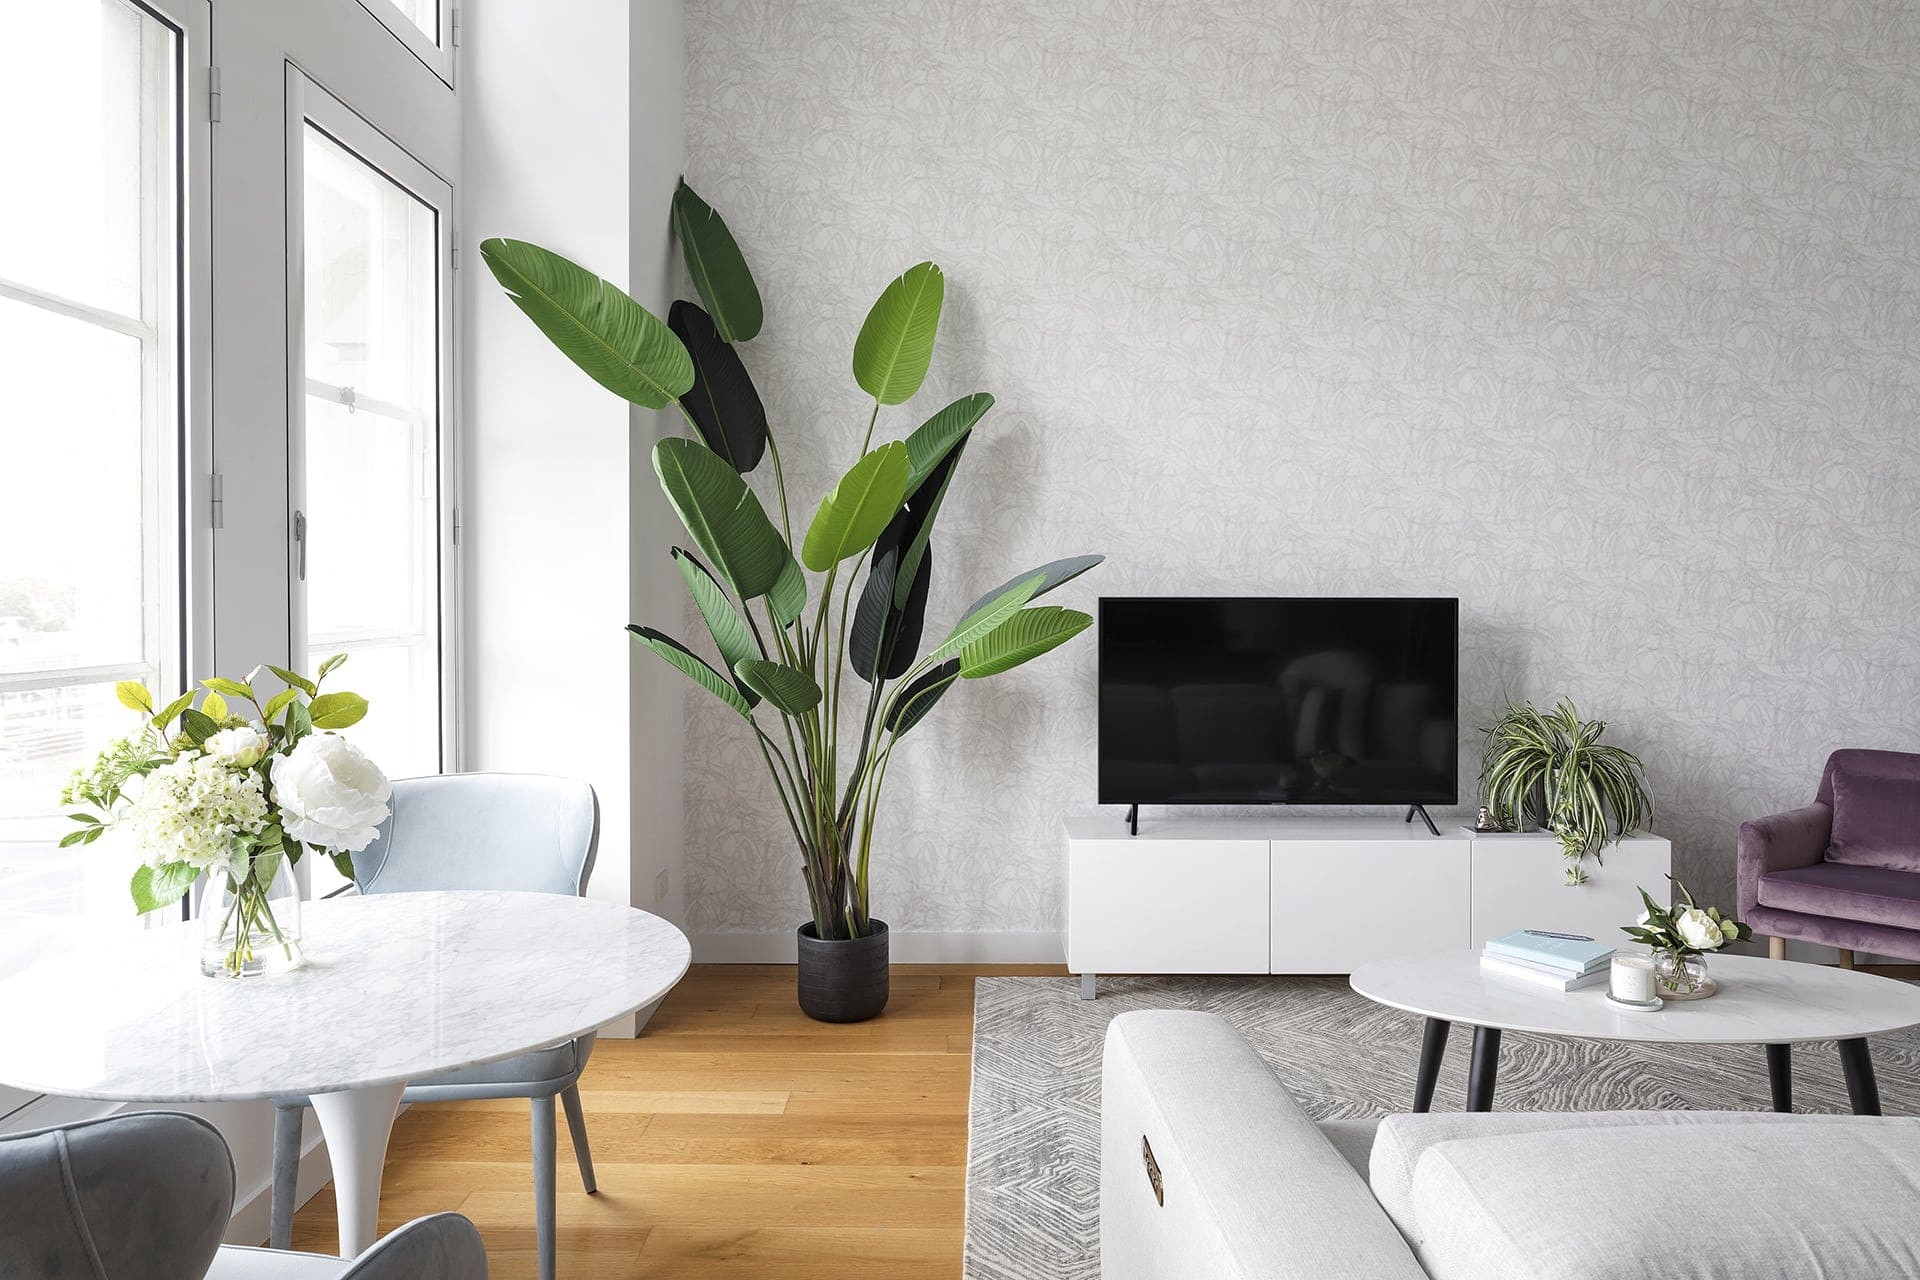 white and grey wallpaper design in melbourne apartment living room with large fake bird of paradise plant